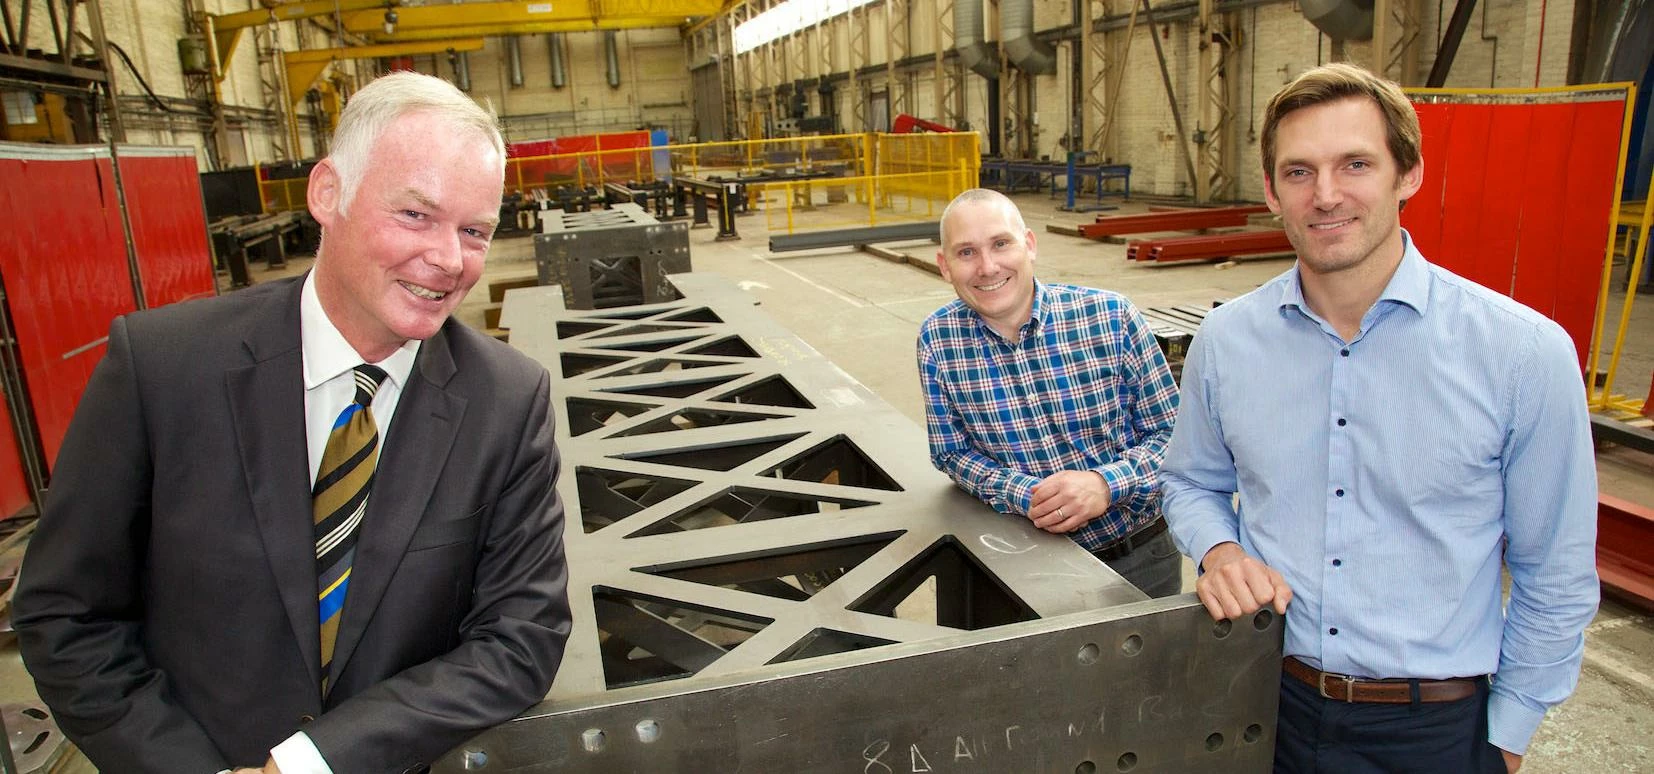 Loughborugh-based Adey Steel has recently won a £15m contract on the Great Western rail line